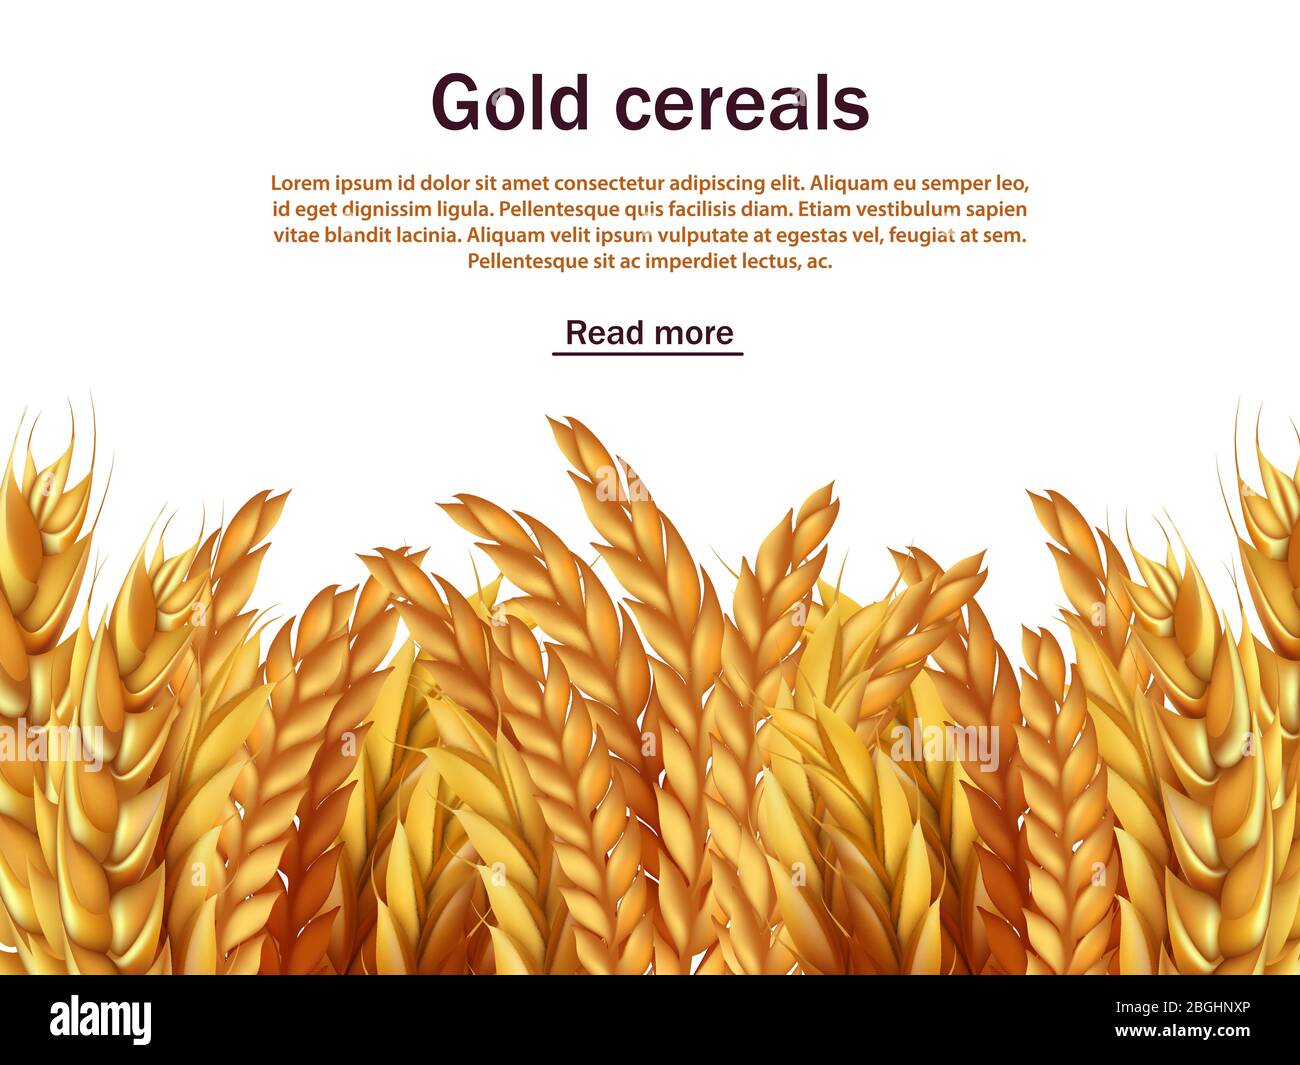 Realistic cereals vector background template. Ears of rye, wheat, barley isolated on white backdrop. Agriculture cereal plant, seed and grain harvest illustration Stock Vector